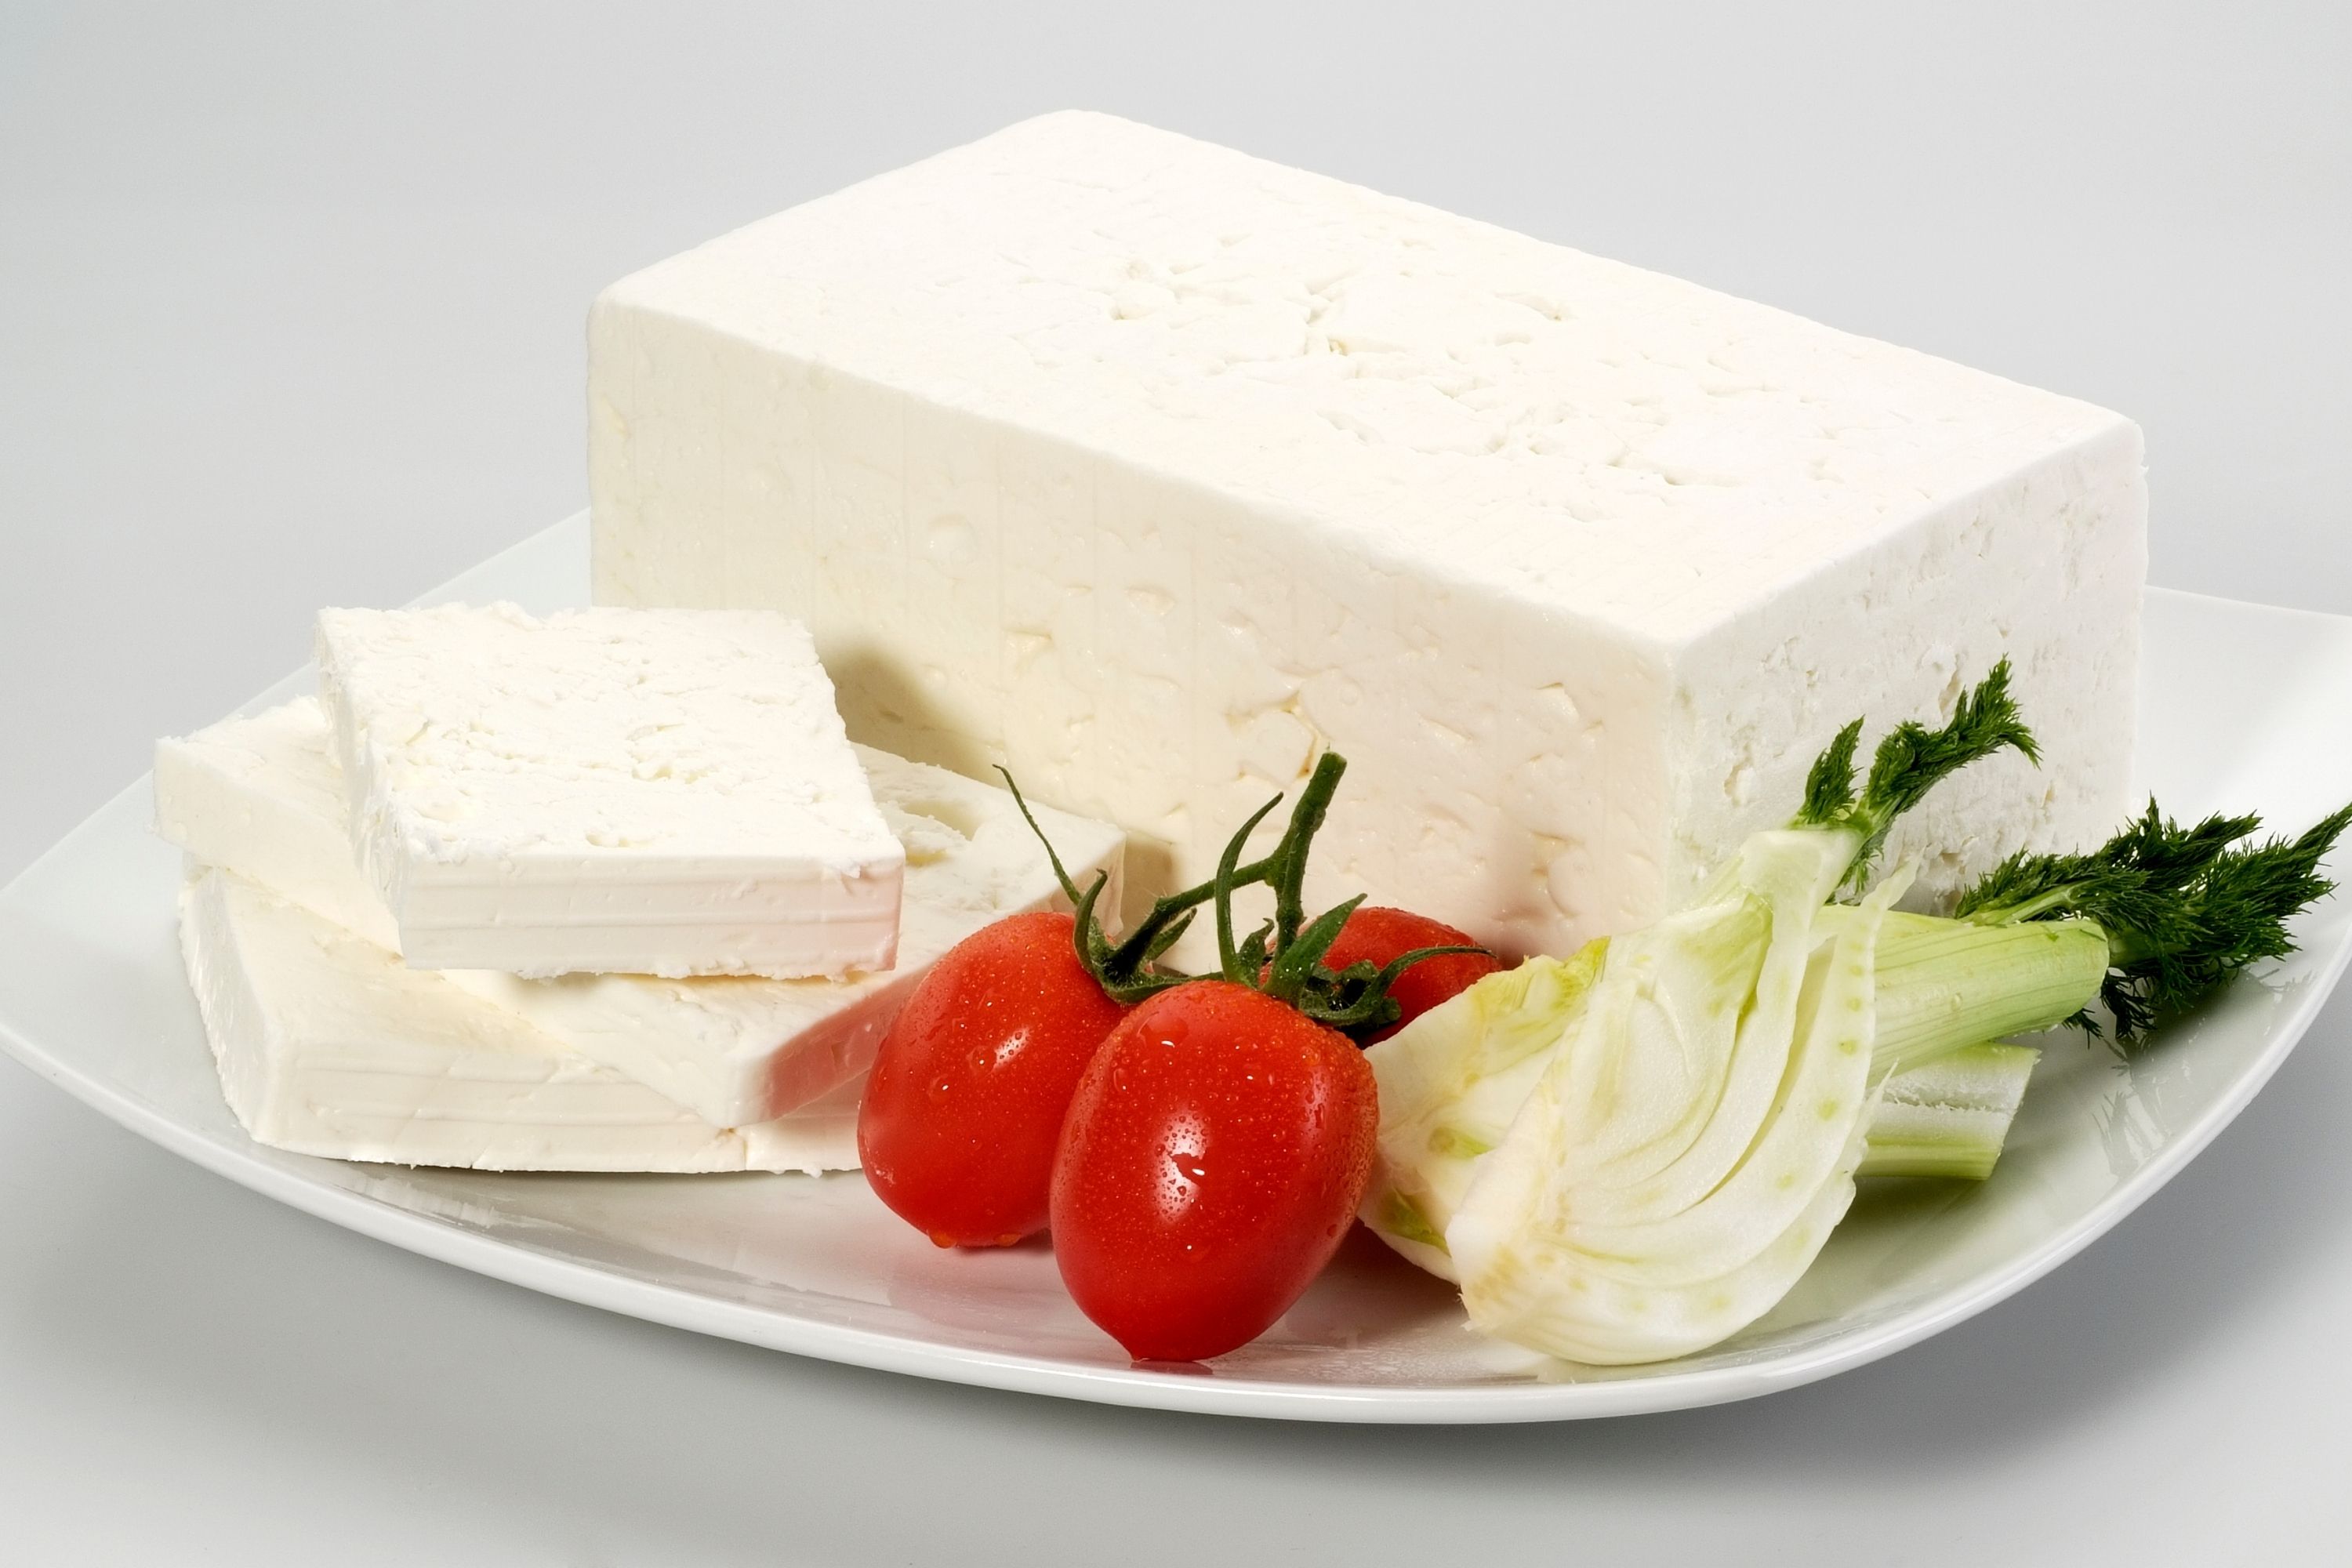 How Does Freezing Affect Feta Cheese